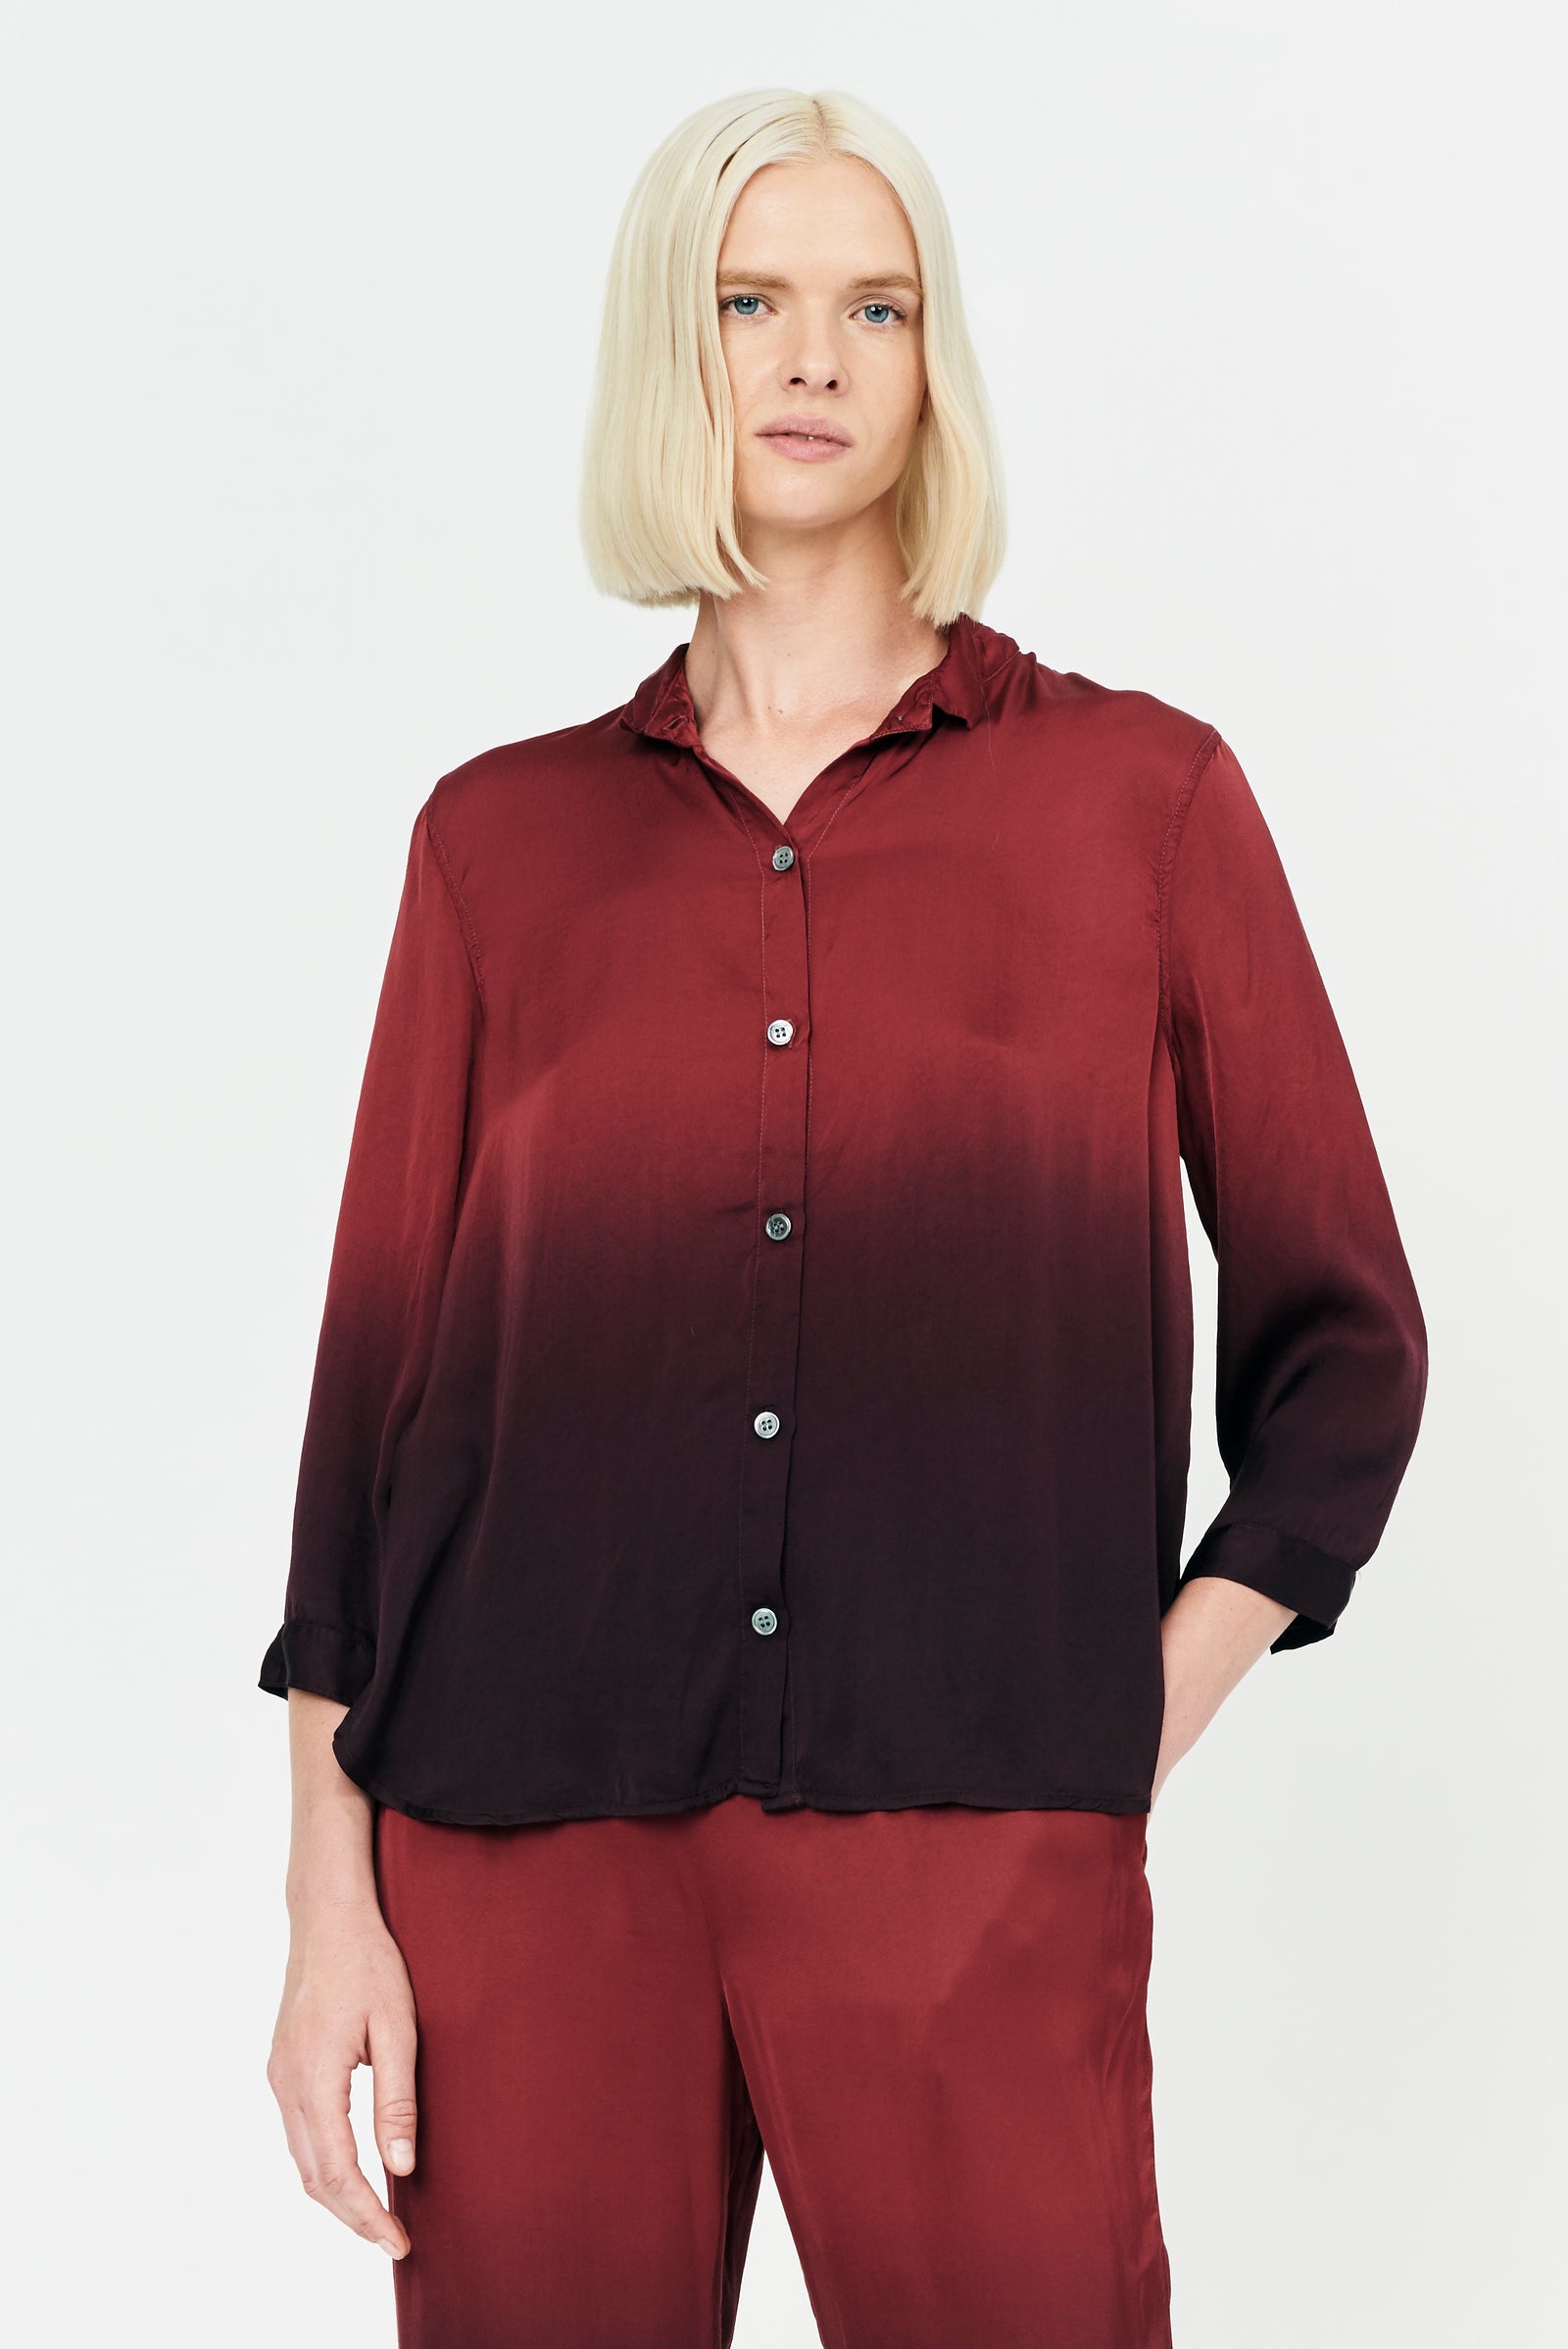 Sienna Gradient Ghost Ranch Matte Satin Essential Blouse Front Close-Up View